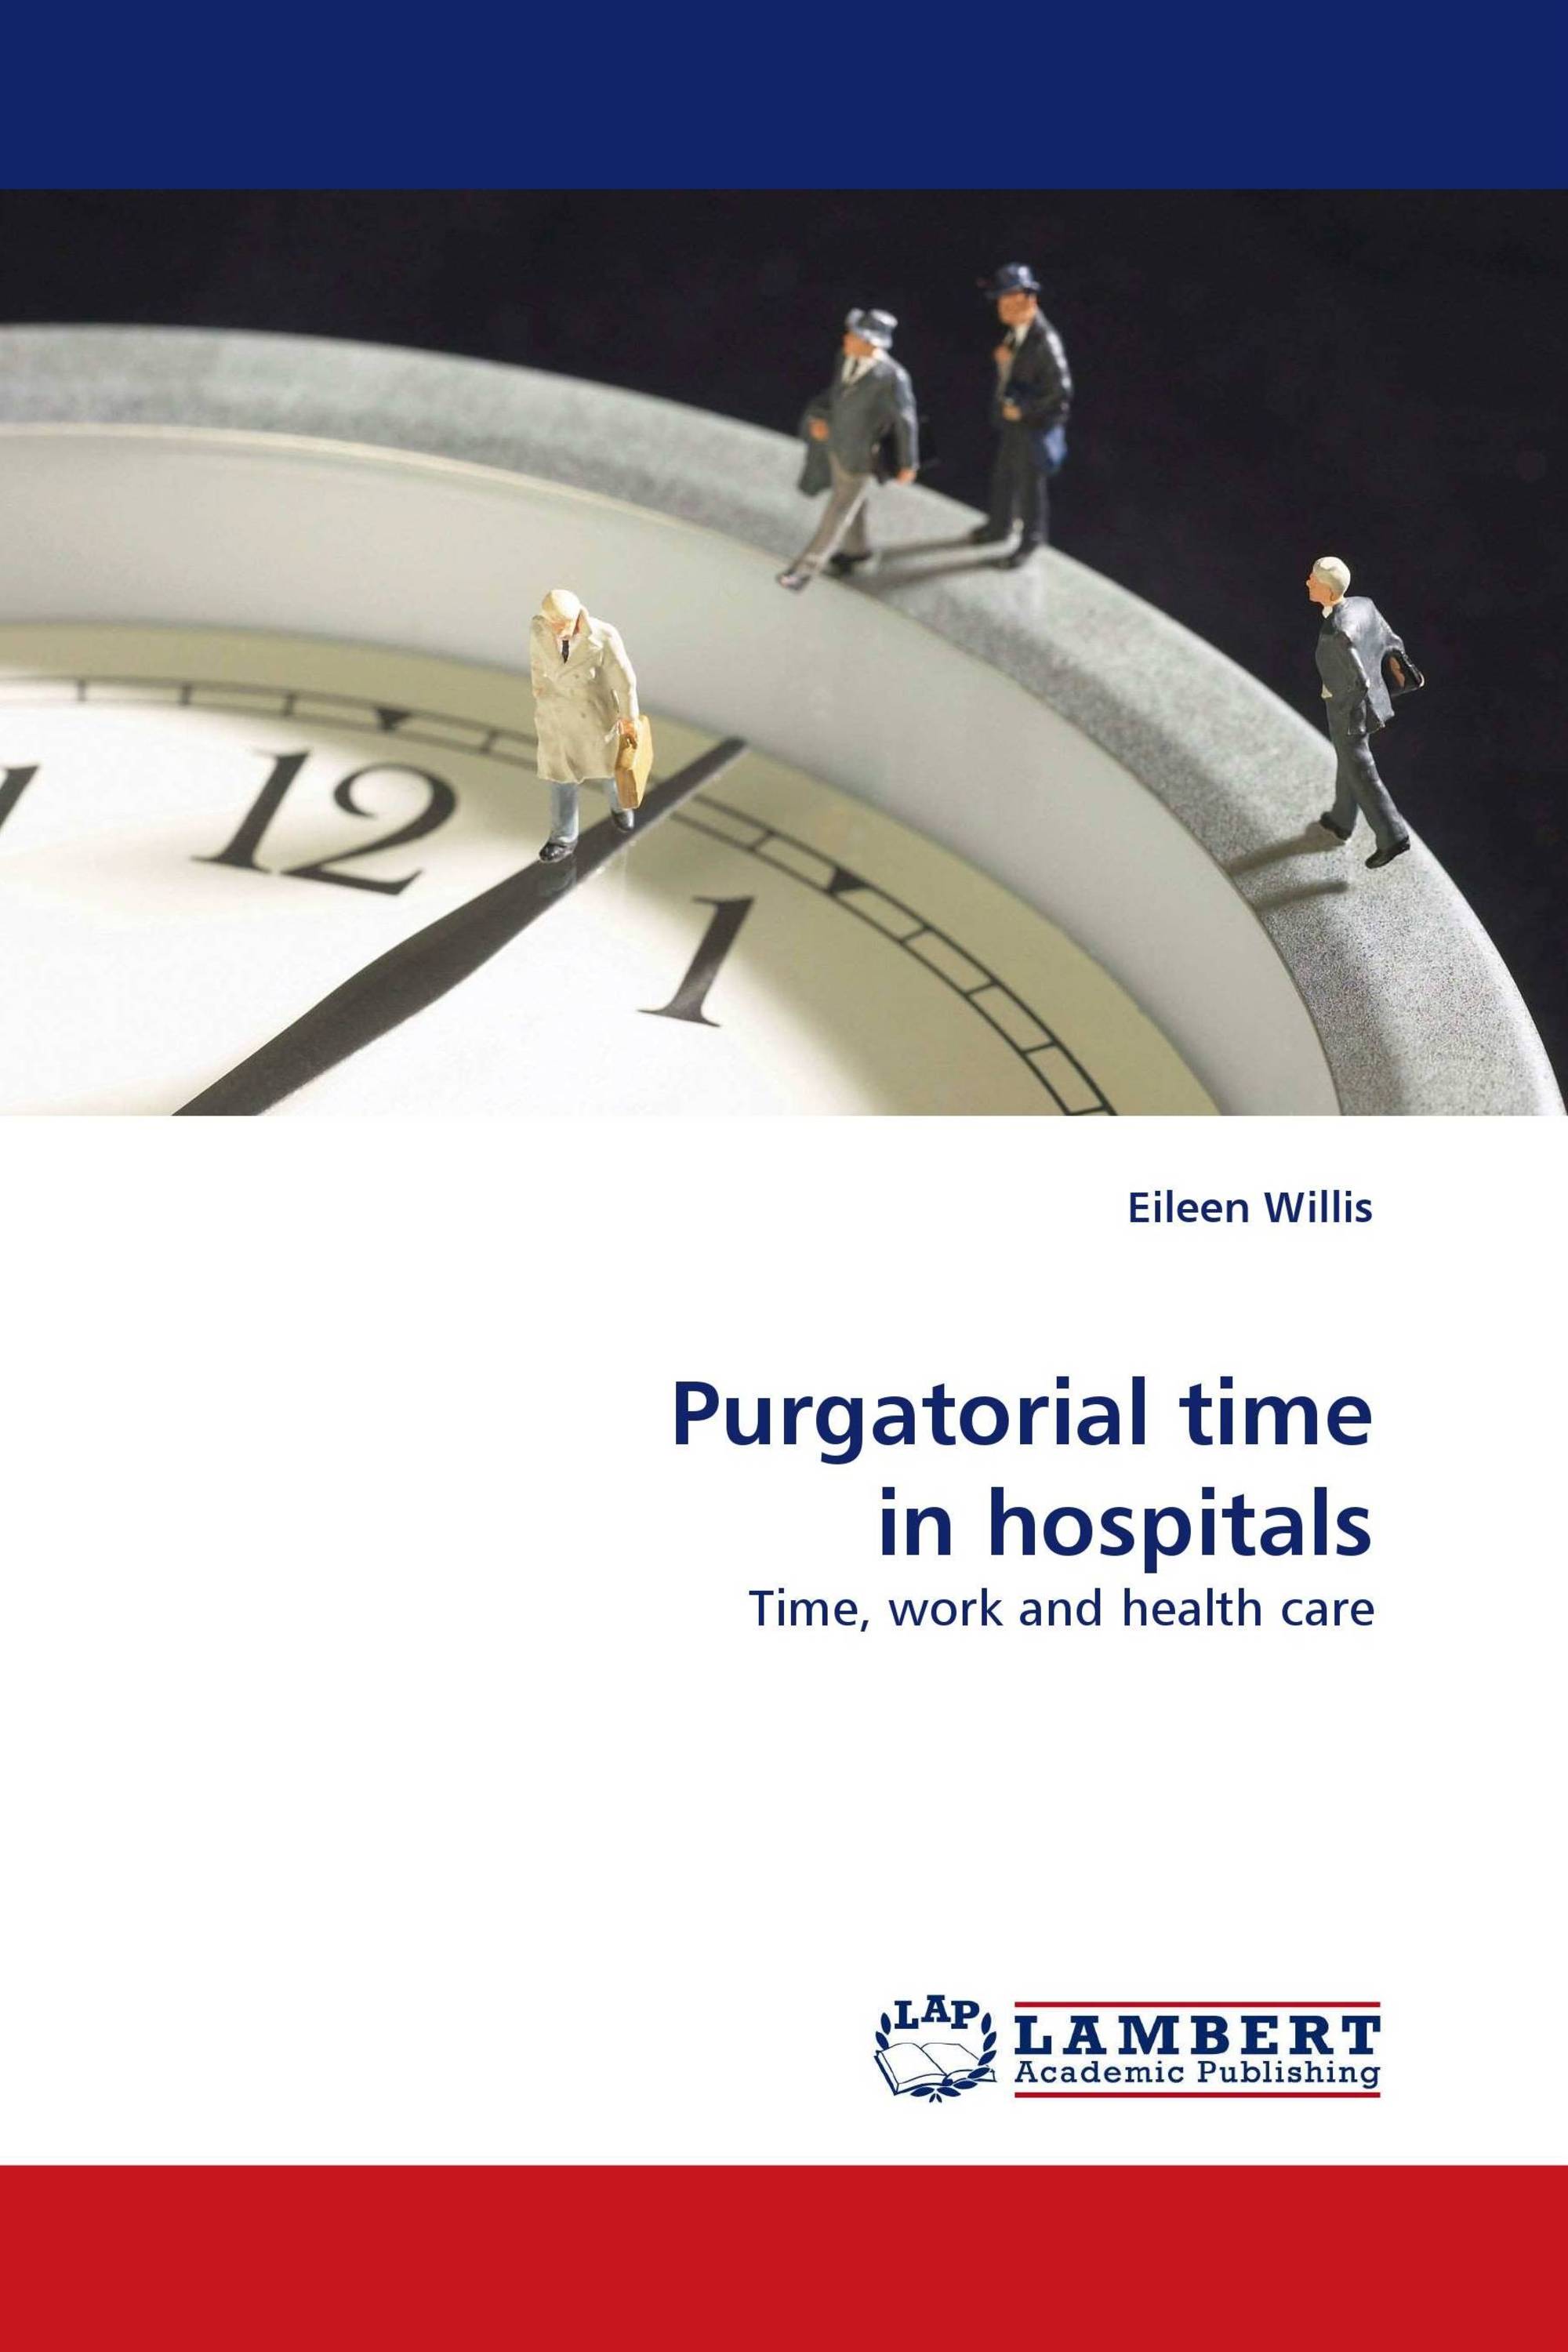 Purgatorial time in hospitals